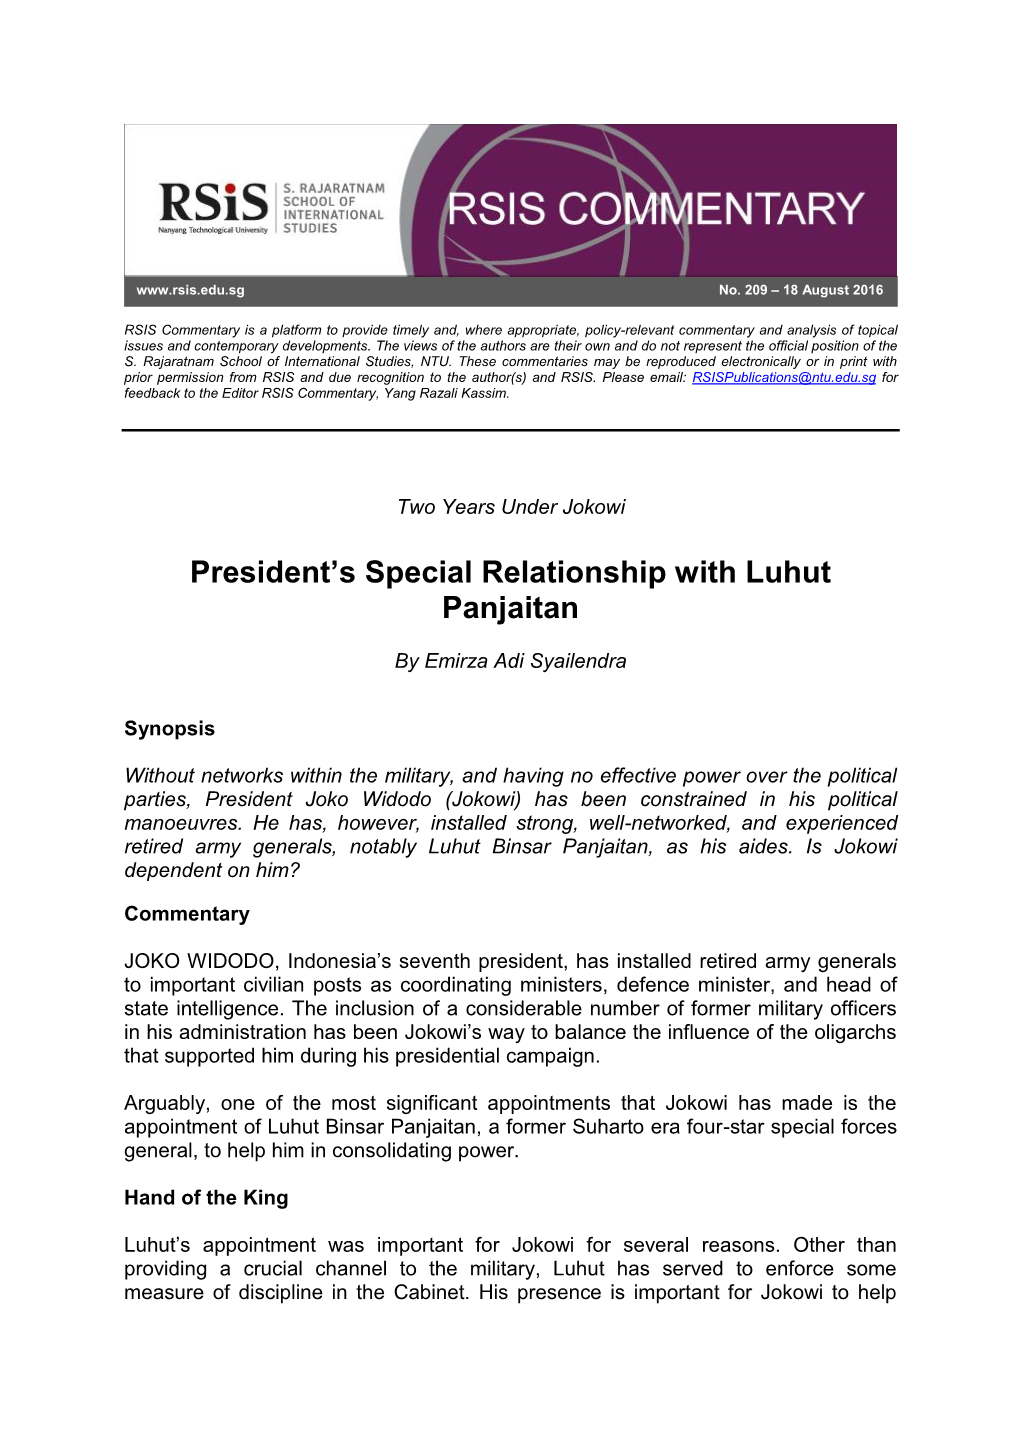 President's Special Relationship with Luhut Panjaitan